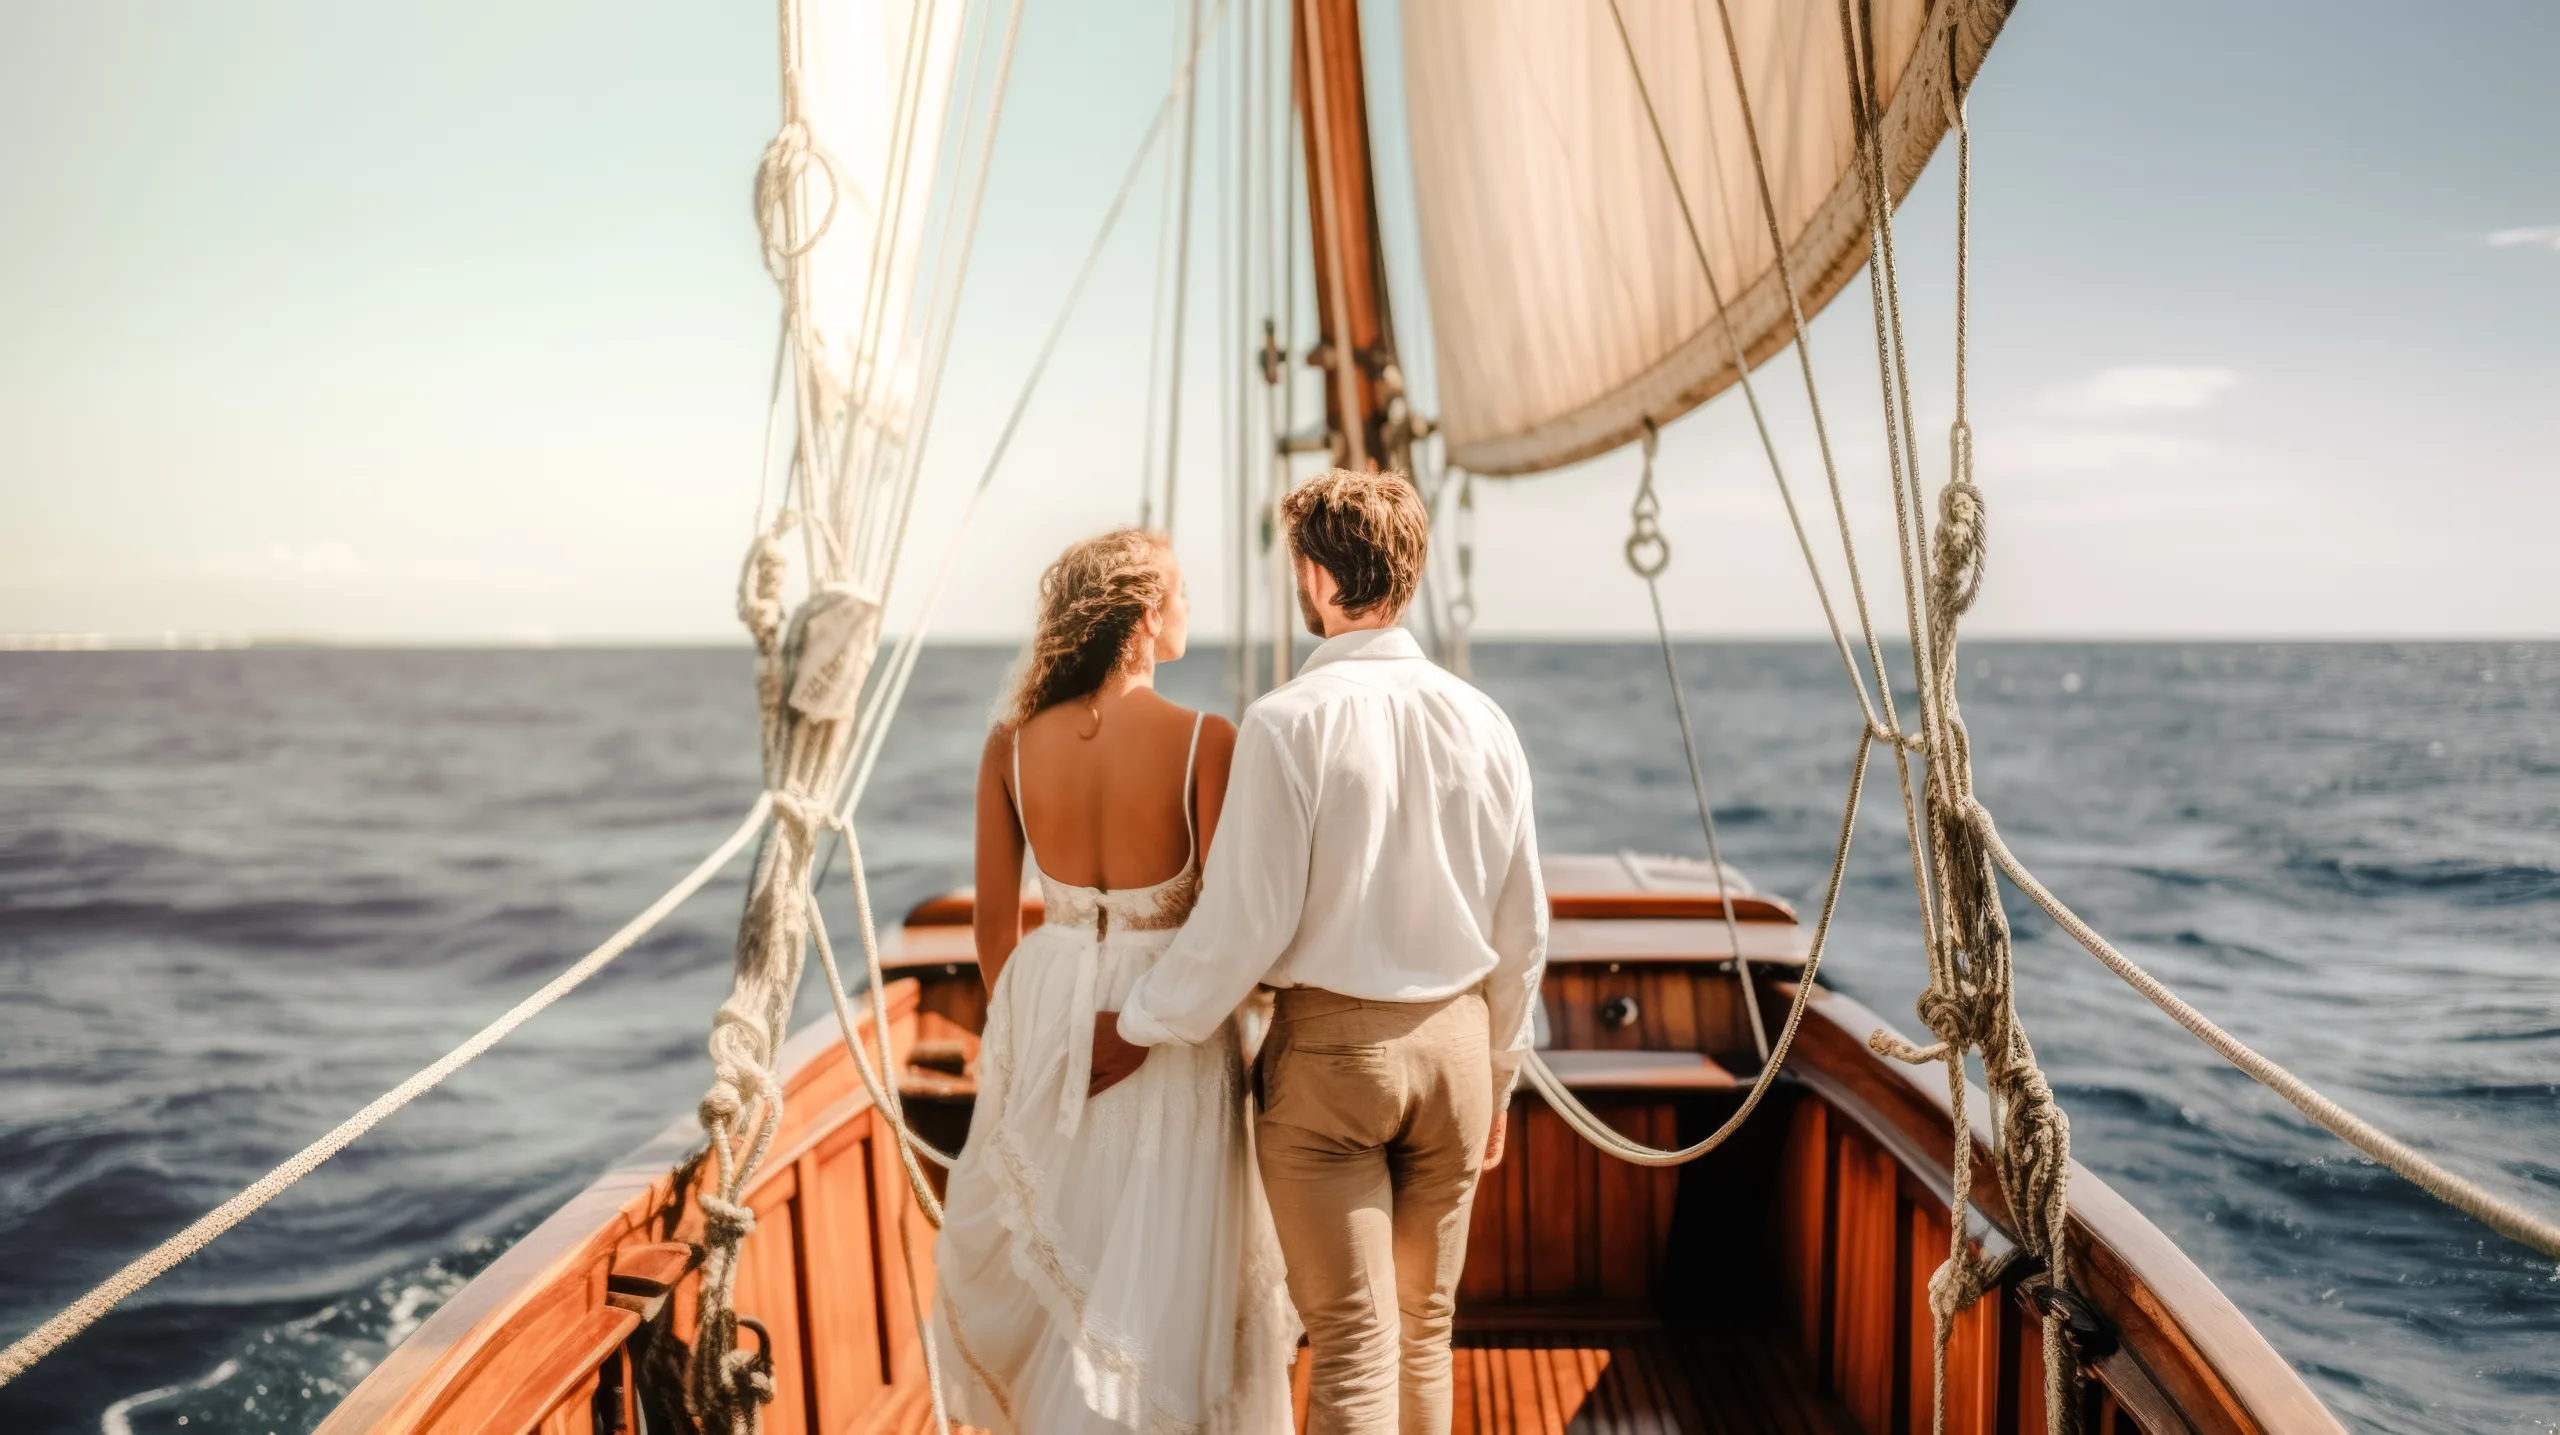 yacht wedding photography: a man and a woman standing on the deck of a boat.